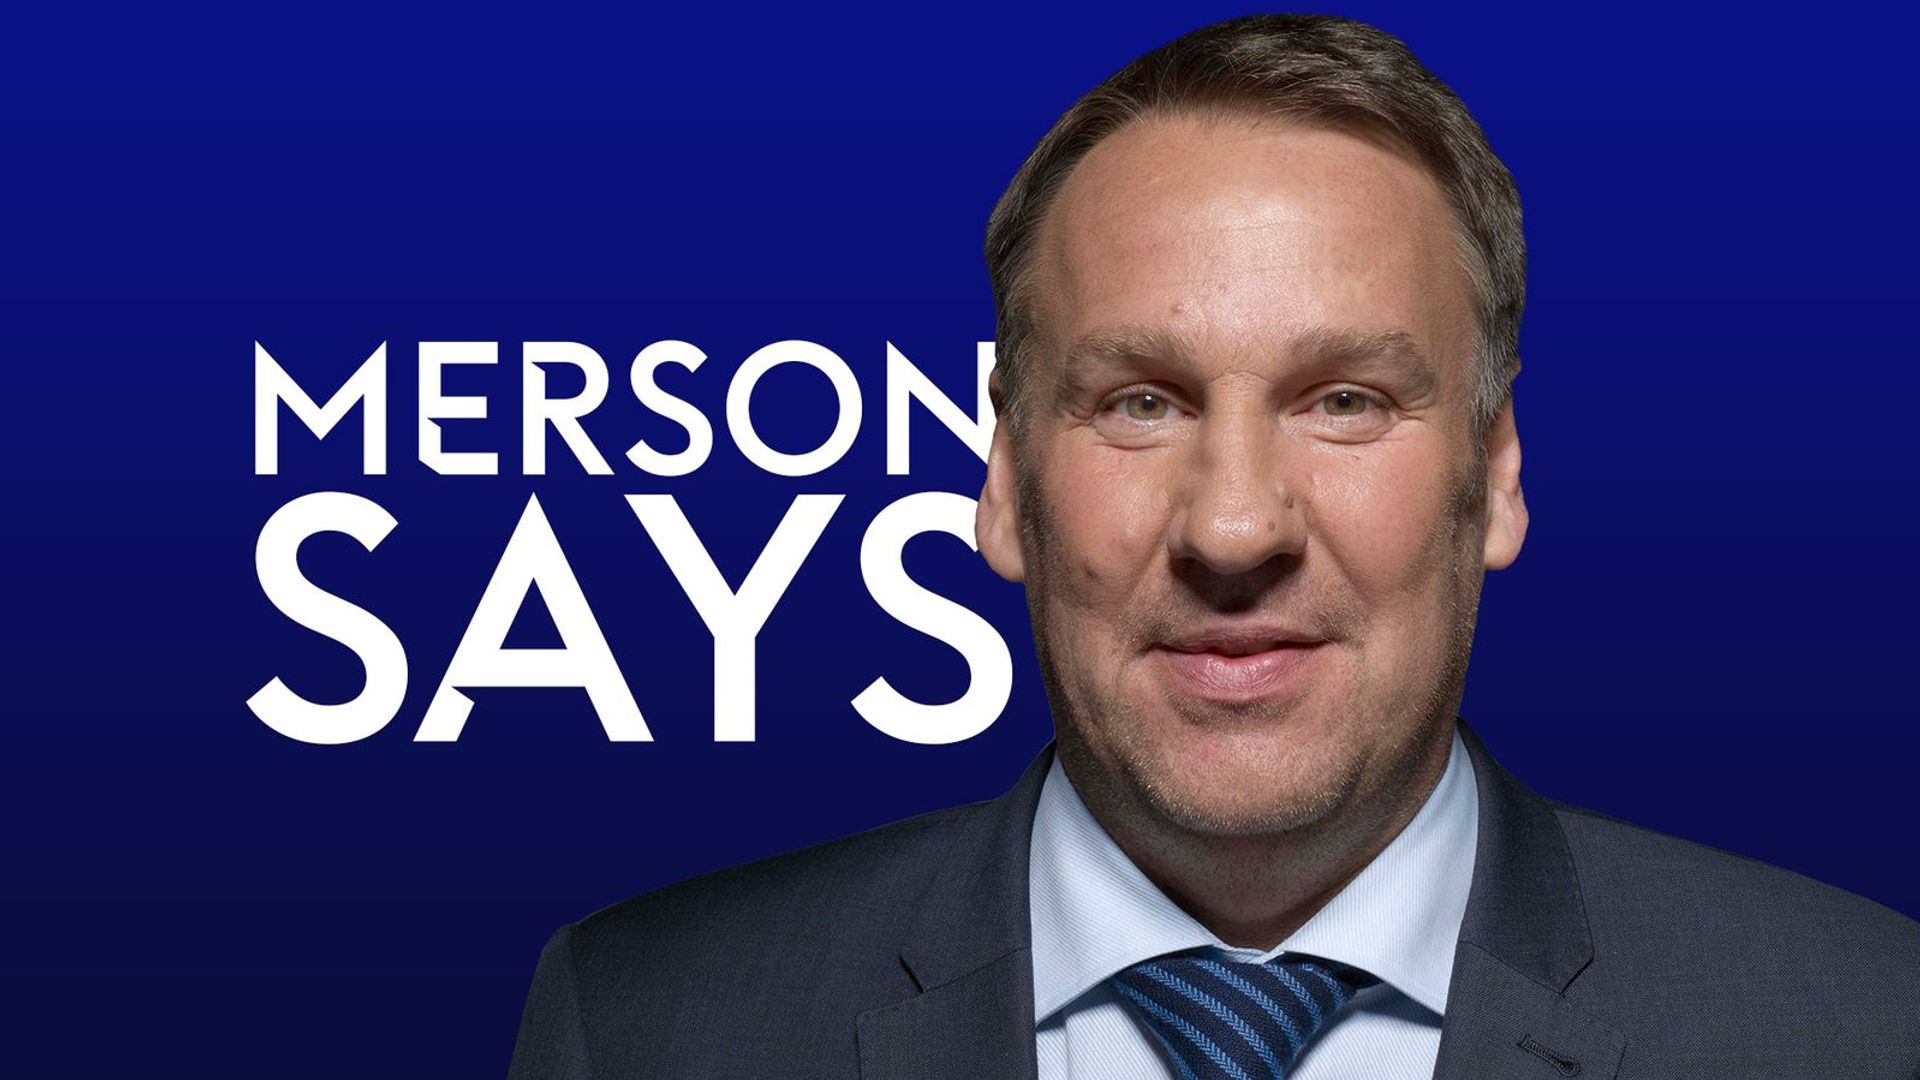 Merson Says: Caicedo to lift Chelsea into top four over Liverpool